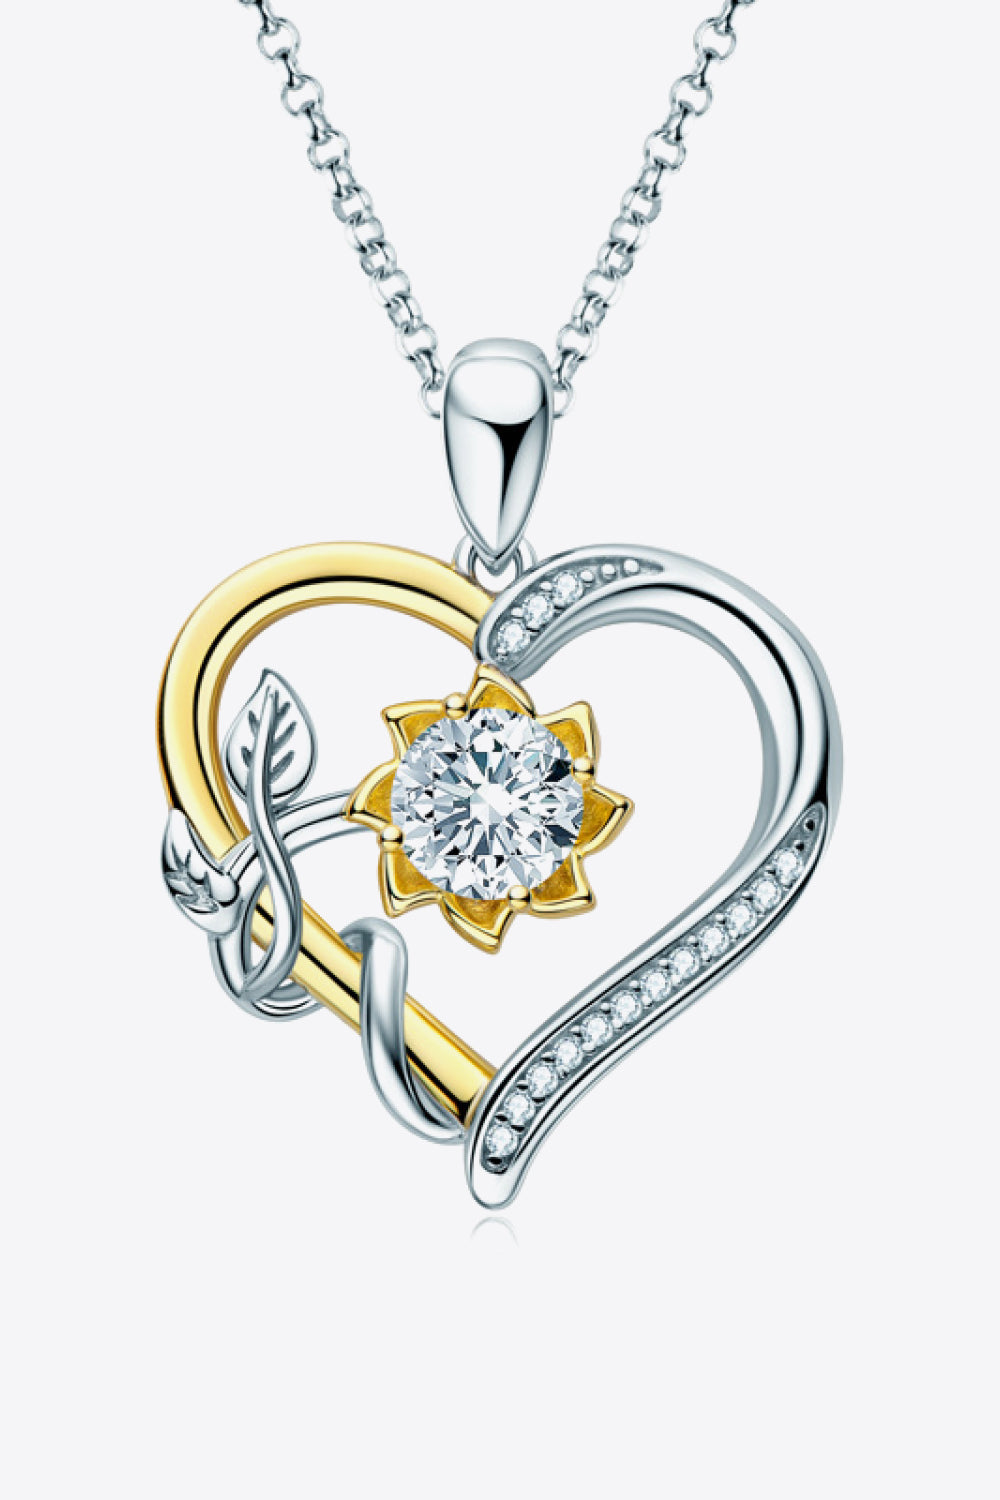 Two-Tone 1 Carat Moissanite Heart Pendant Necklace - Necklaces - FITGGINS